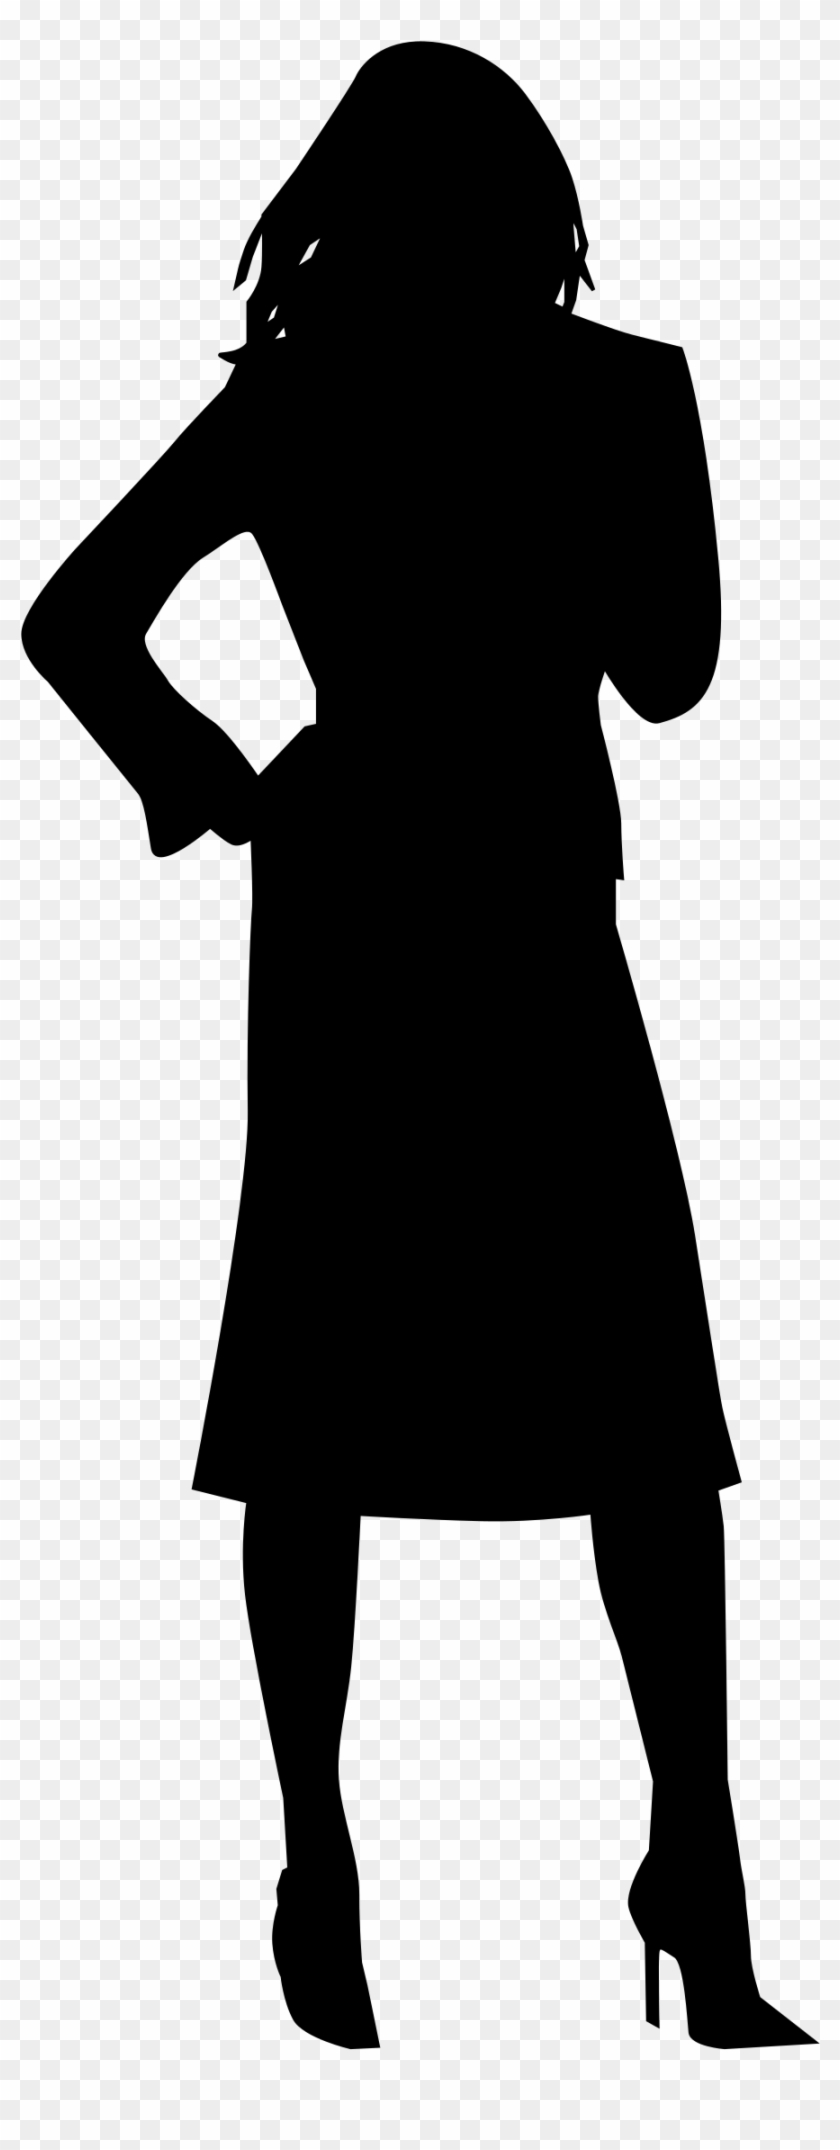 Clipart Free Silhouette - Woman Silhouette Icon Png Transparent Png #34656